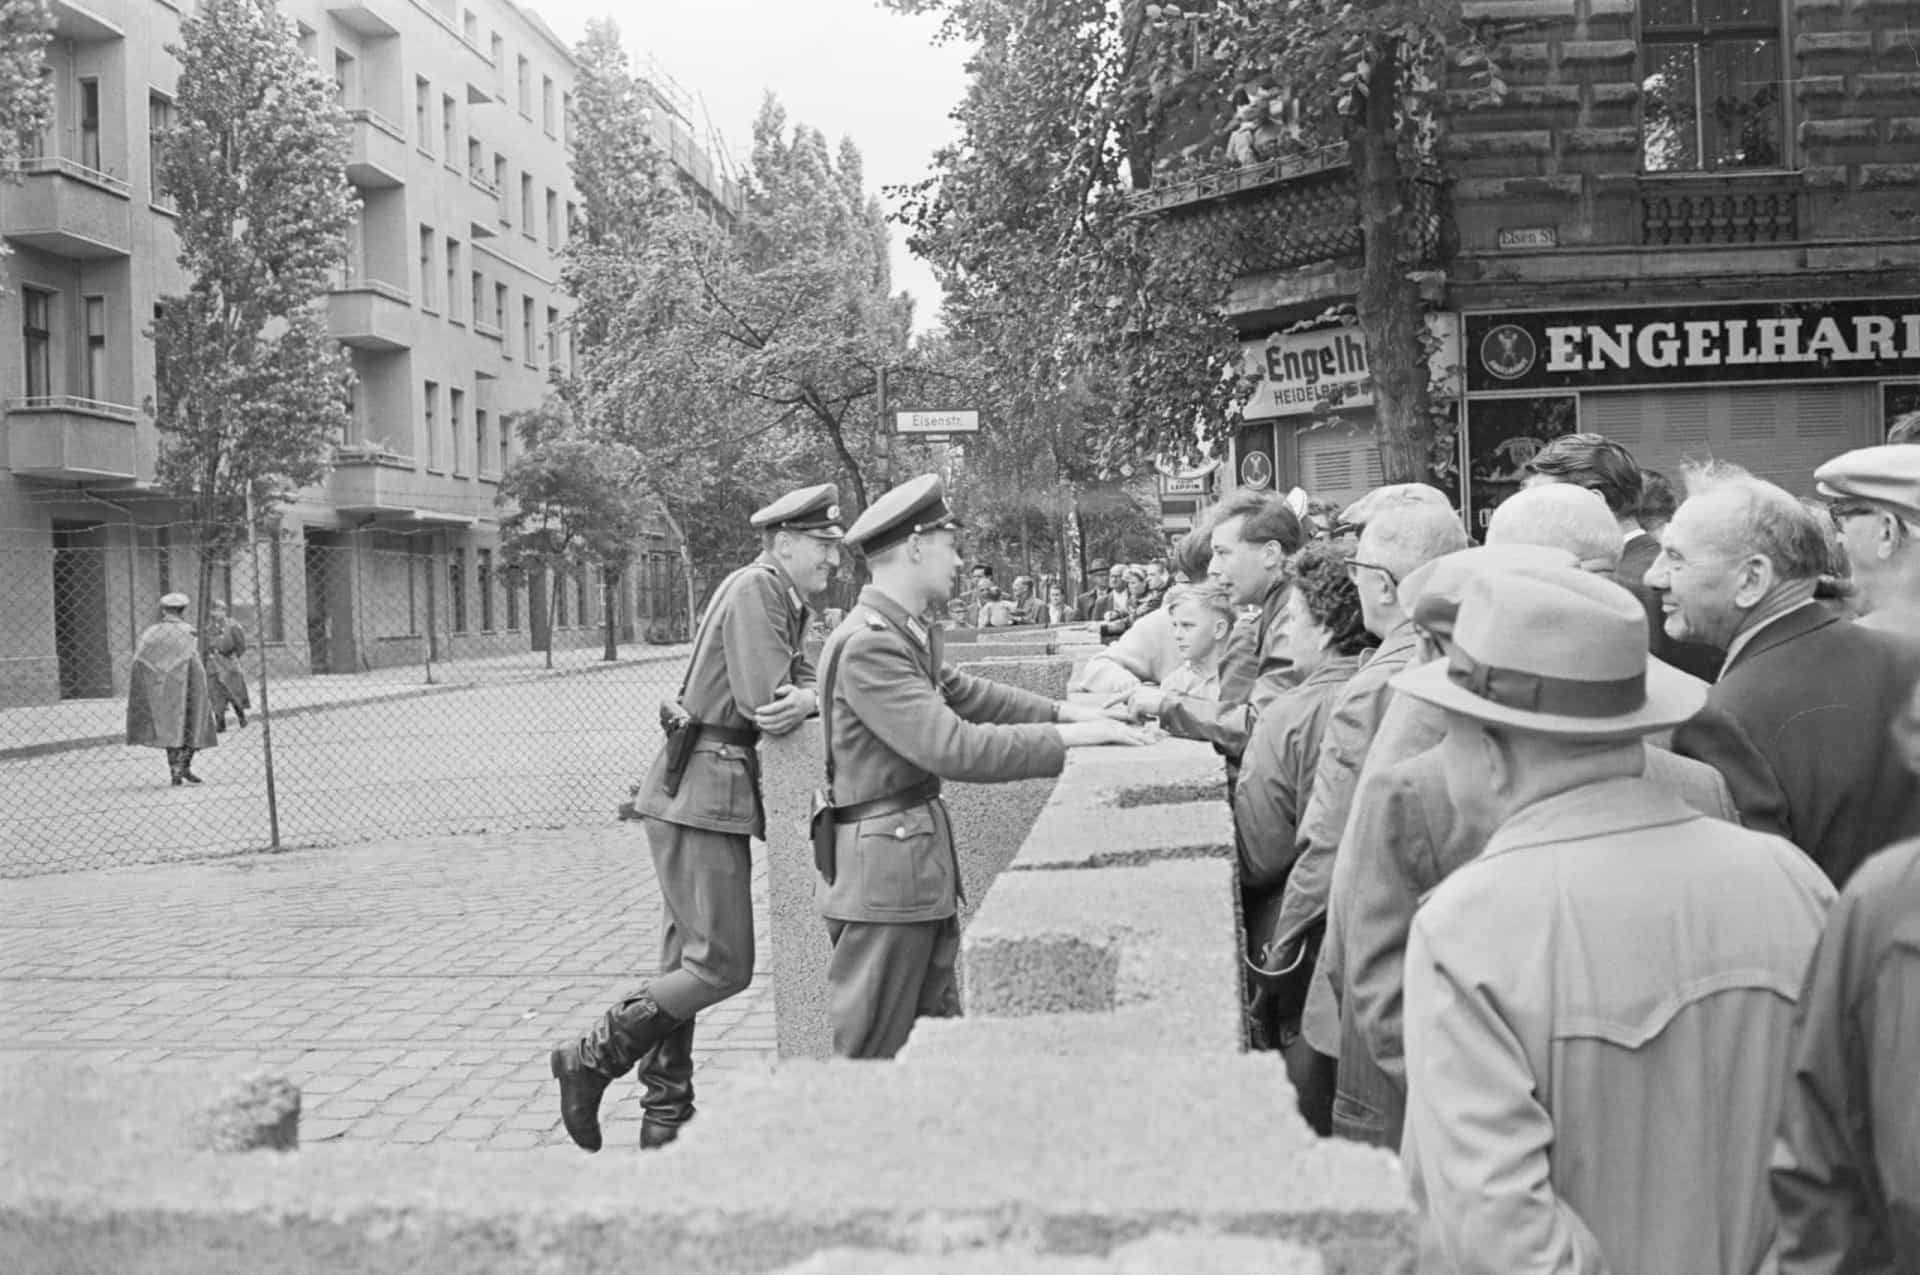 <p>Pictured: conversing across a barricade, members of the East German police force try to explain the situation to a group of West Berliners after the closing of an East-West border point in Berlin.</p><p><a href="https://www.msn.com/en-us/community/channel/vid-7xx8mnucu55yw63we9va2gwr7uihbxwc68fxqp25x6tg4ftibpra?cvid=94631541bc0f4f89bfd59158d696ad7e">Follow us and access great exclusive content everyday</a></p>